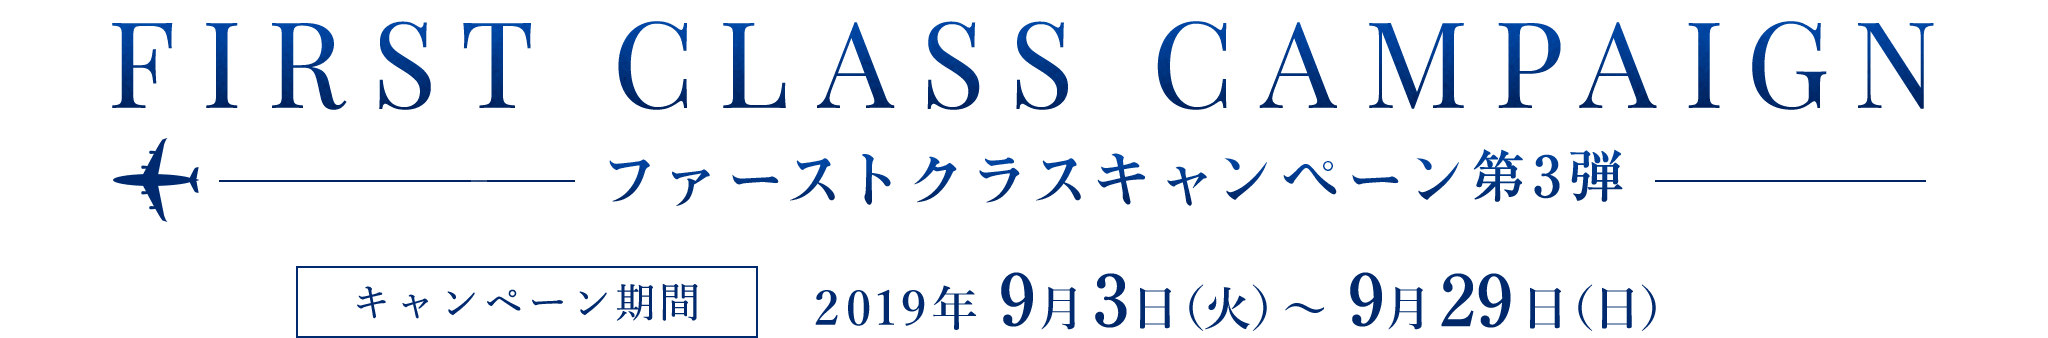 FIRST CLASS CAMPAIGN キャンペーン期間2019年7月9日（火）〜8月4日（日）